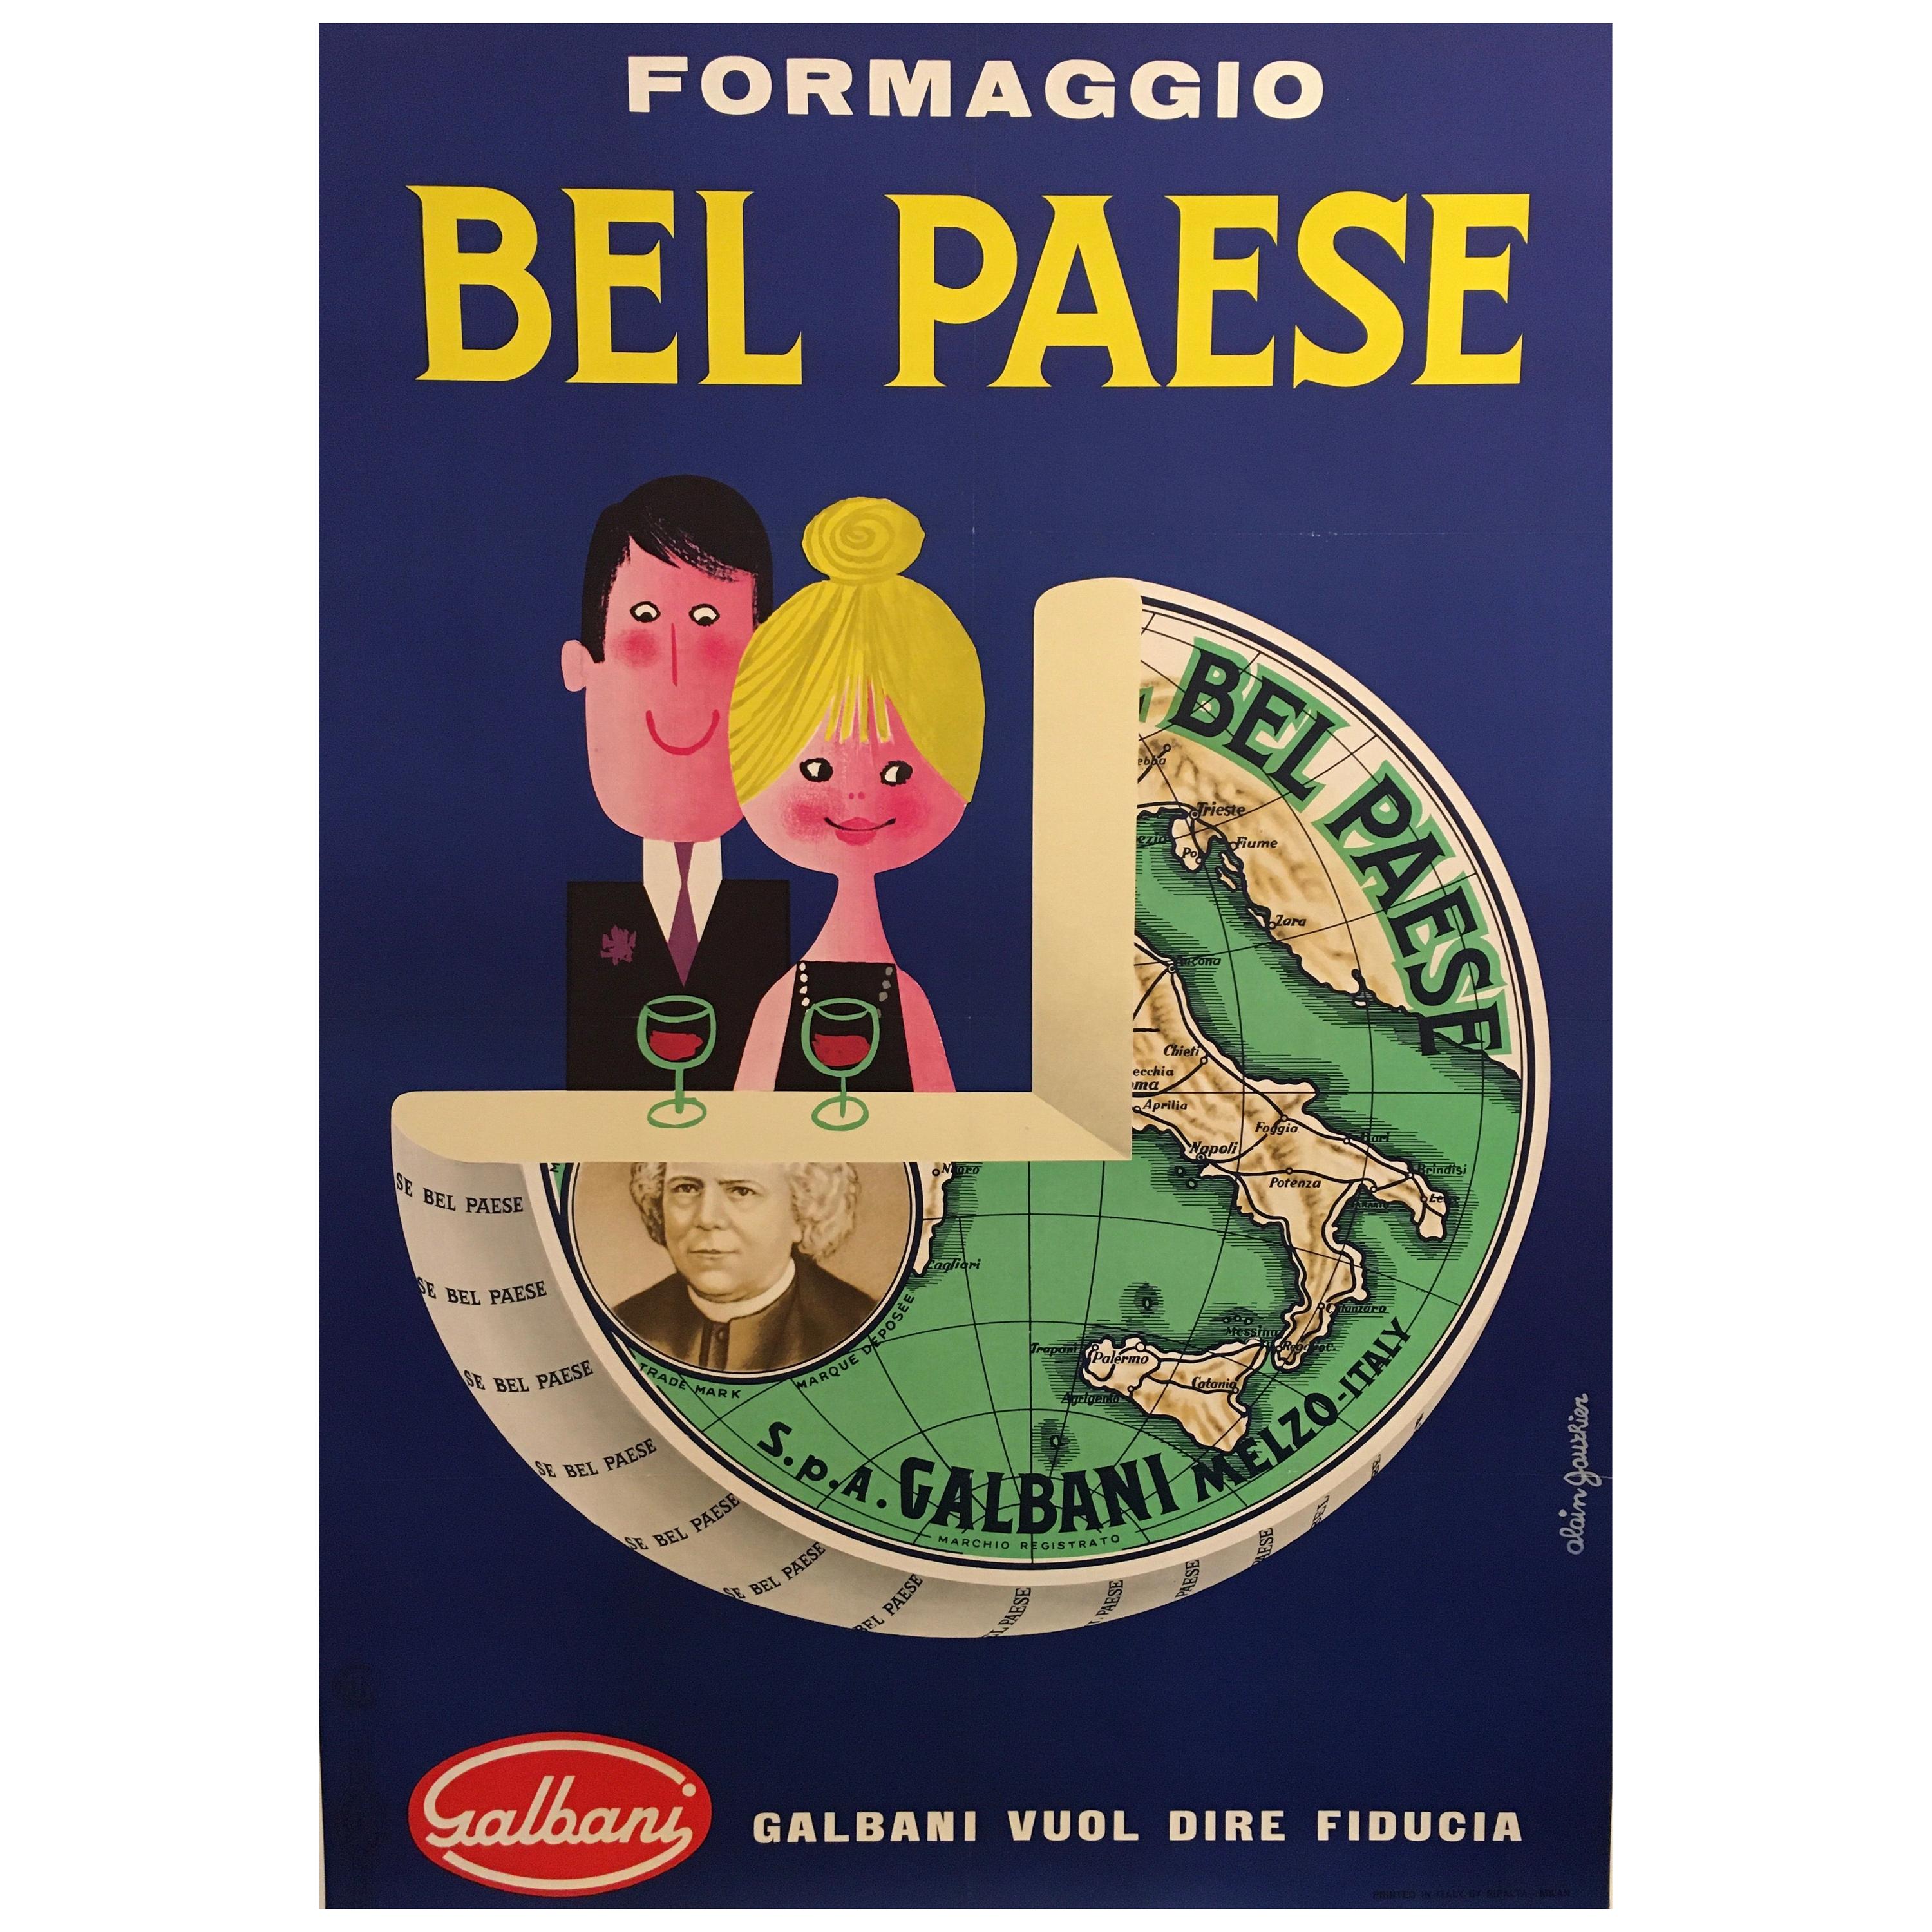 'Bel Paese Formaggio', Original Vintage Mid-1960s Poster, by Alain Gauthier